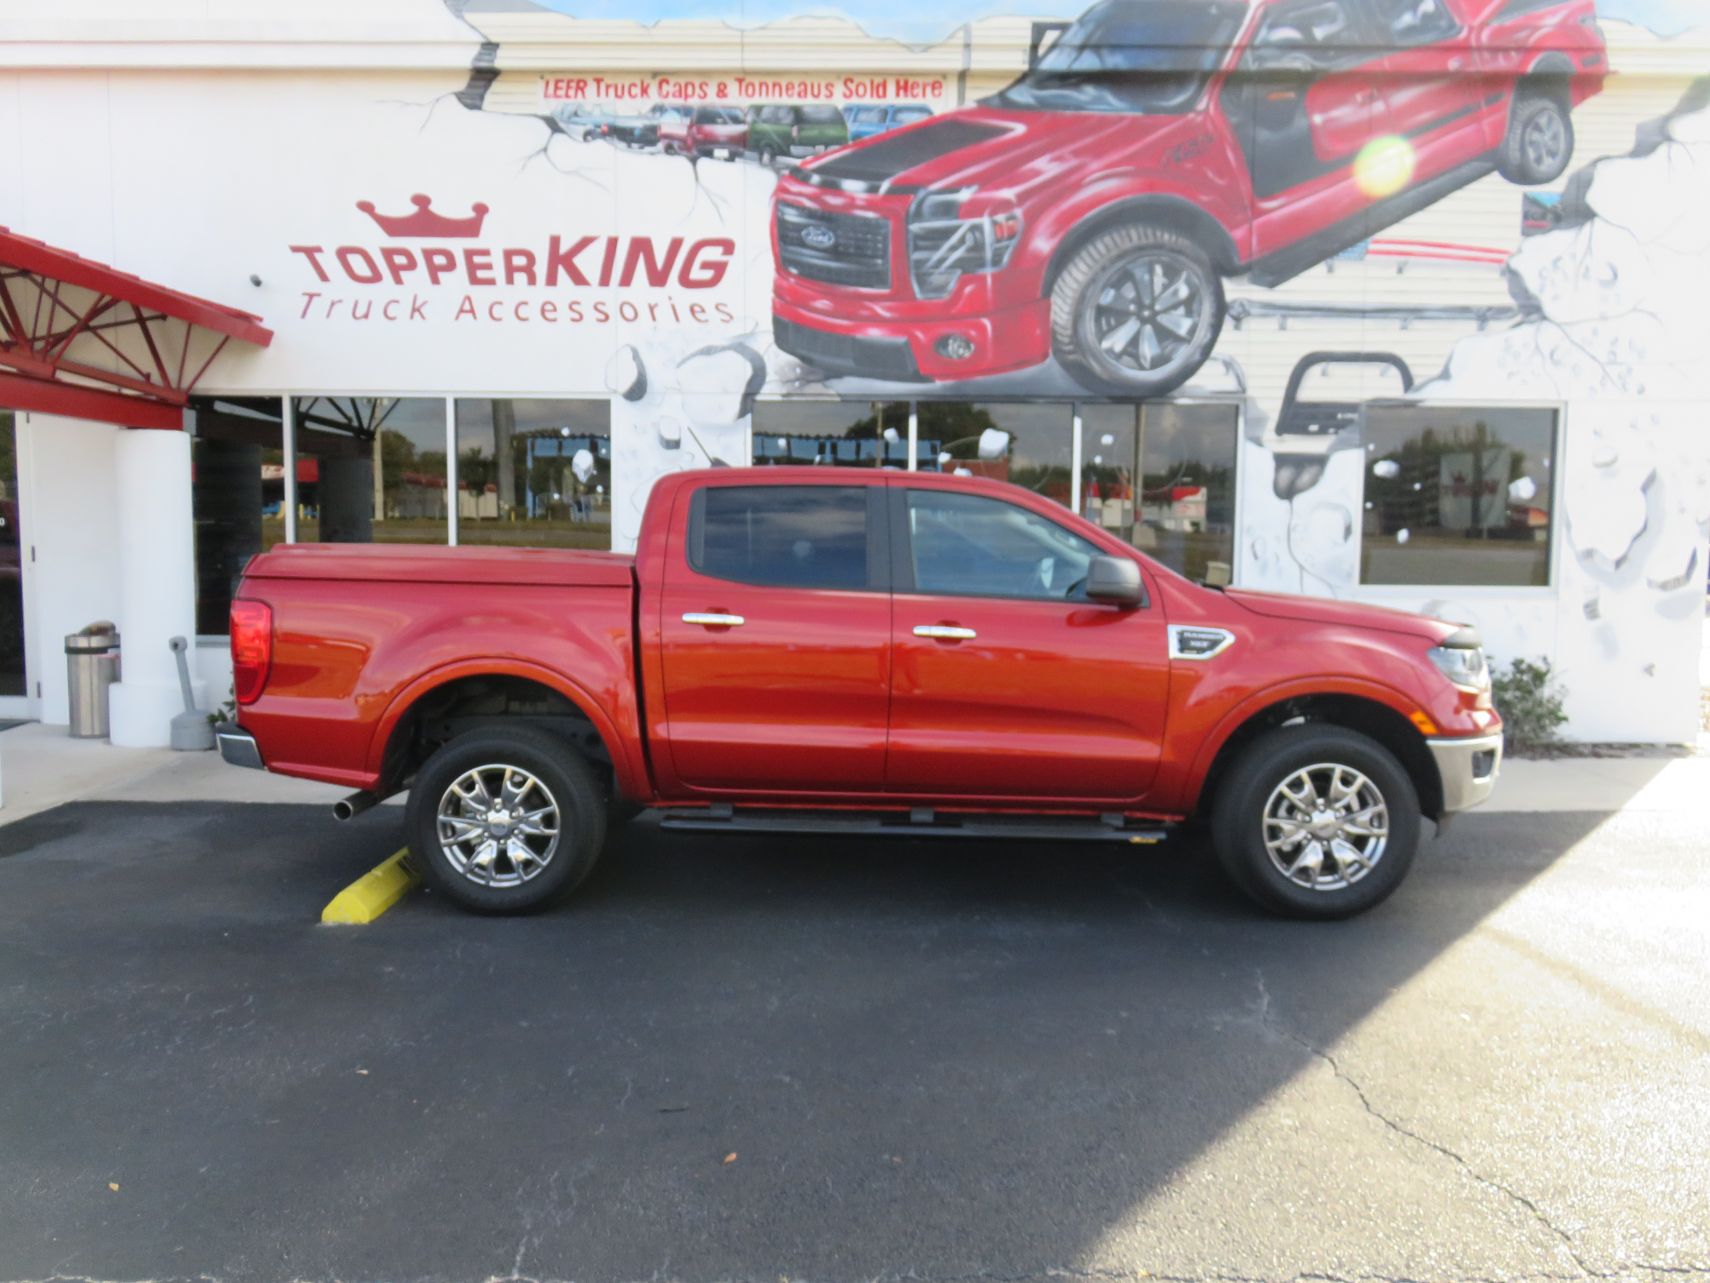 2020 Ranger LEER 700 with BEDSLIDE, Nerf Bars, BedRug, Hood Guard, Tint, Hitch by TopperKING in Brandon 813-689-2449 or Clearwater 727-530-9066. Call Today!